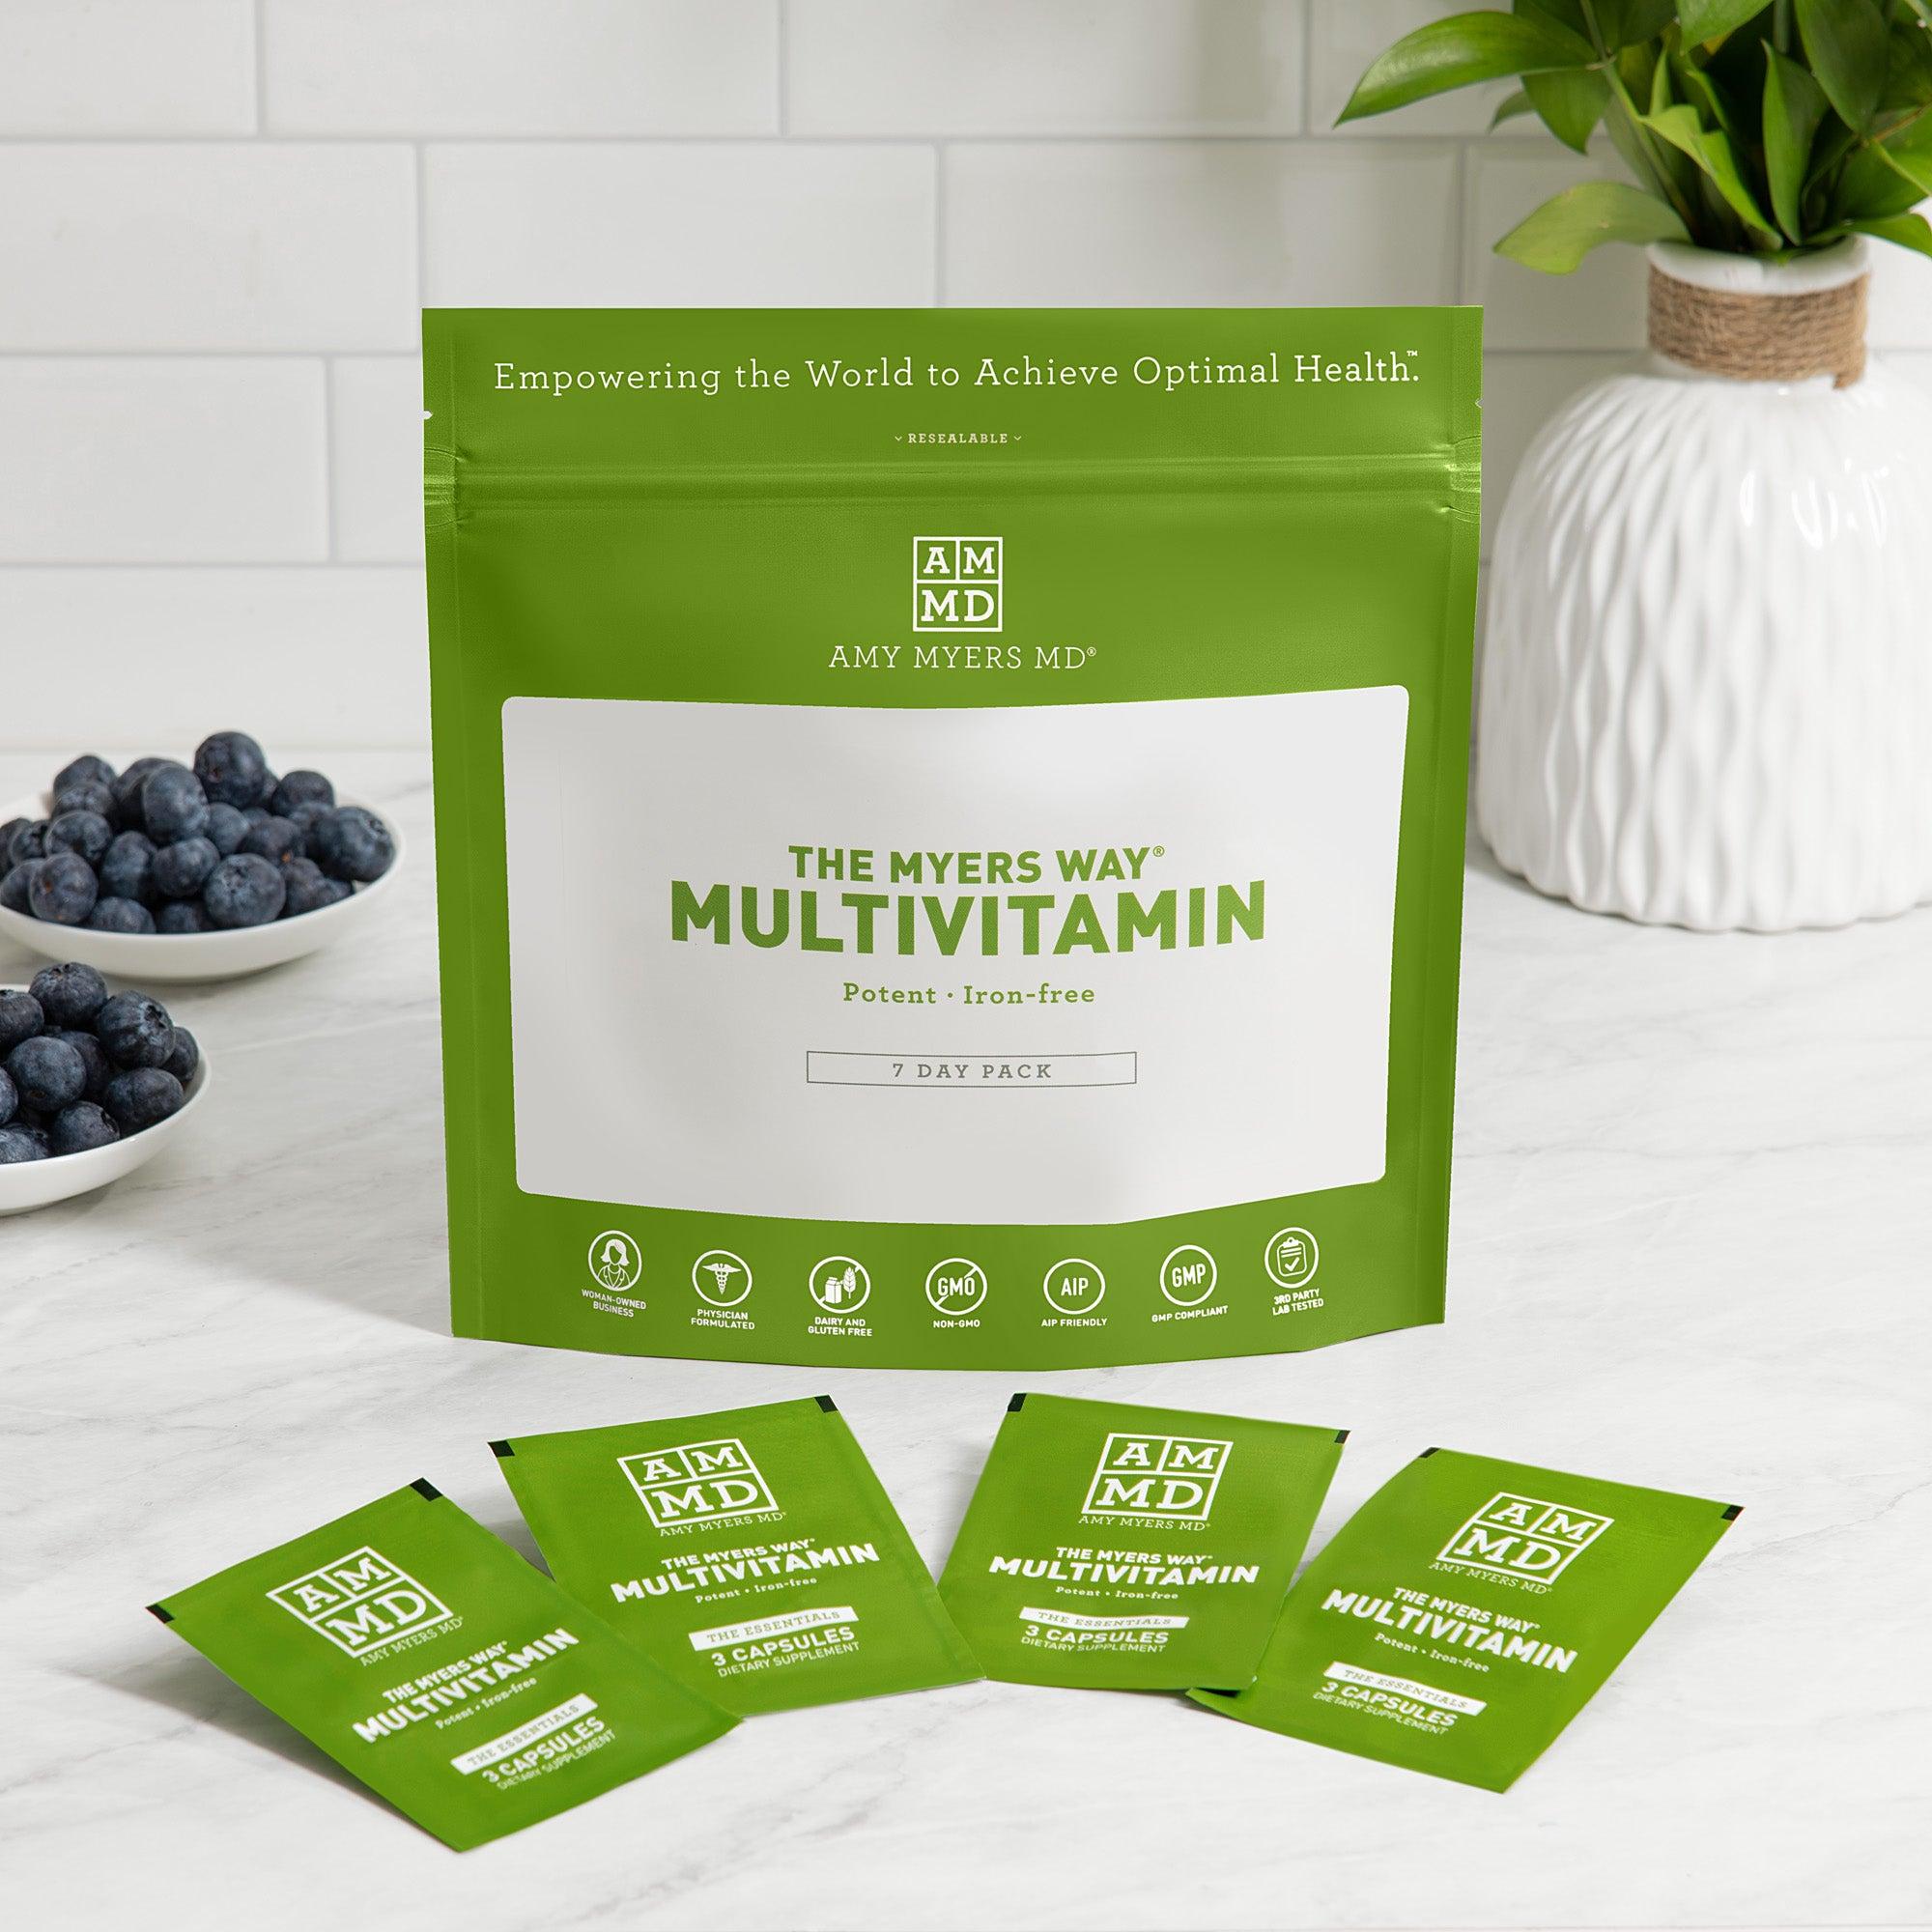 A set of The Myers May® Multivitamin packets - Multivitamin 7 Day Pack - Featured Image - Amy Myers MD